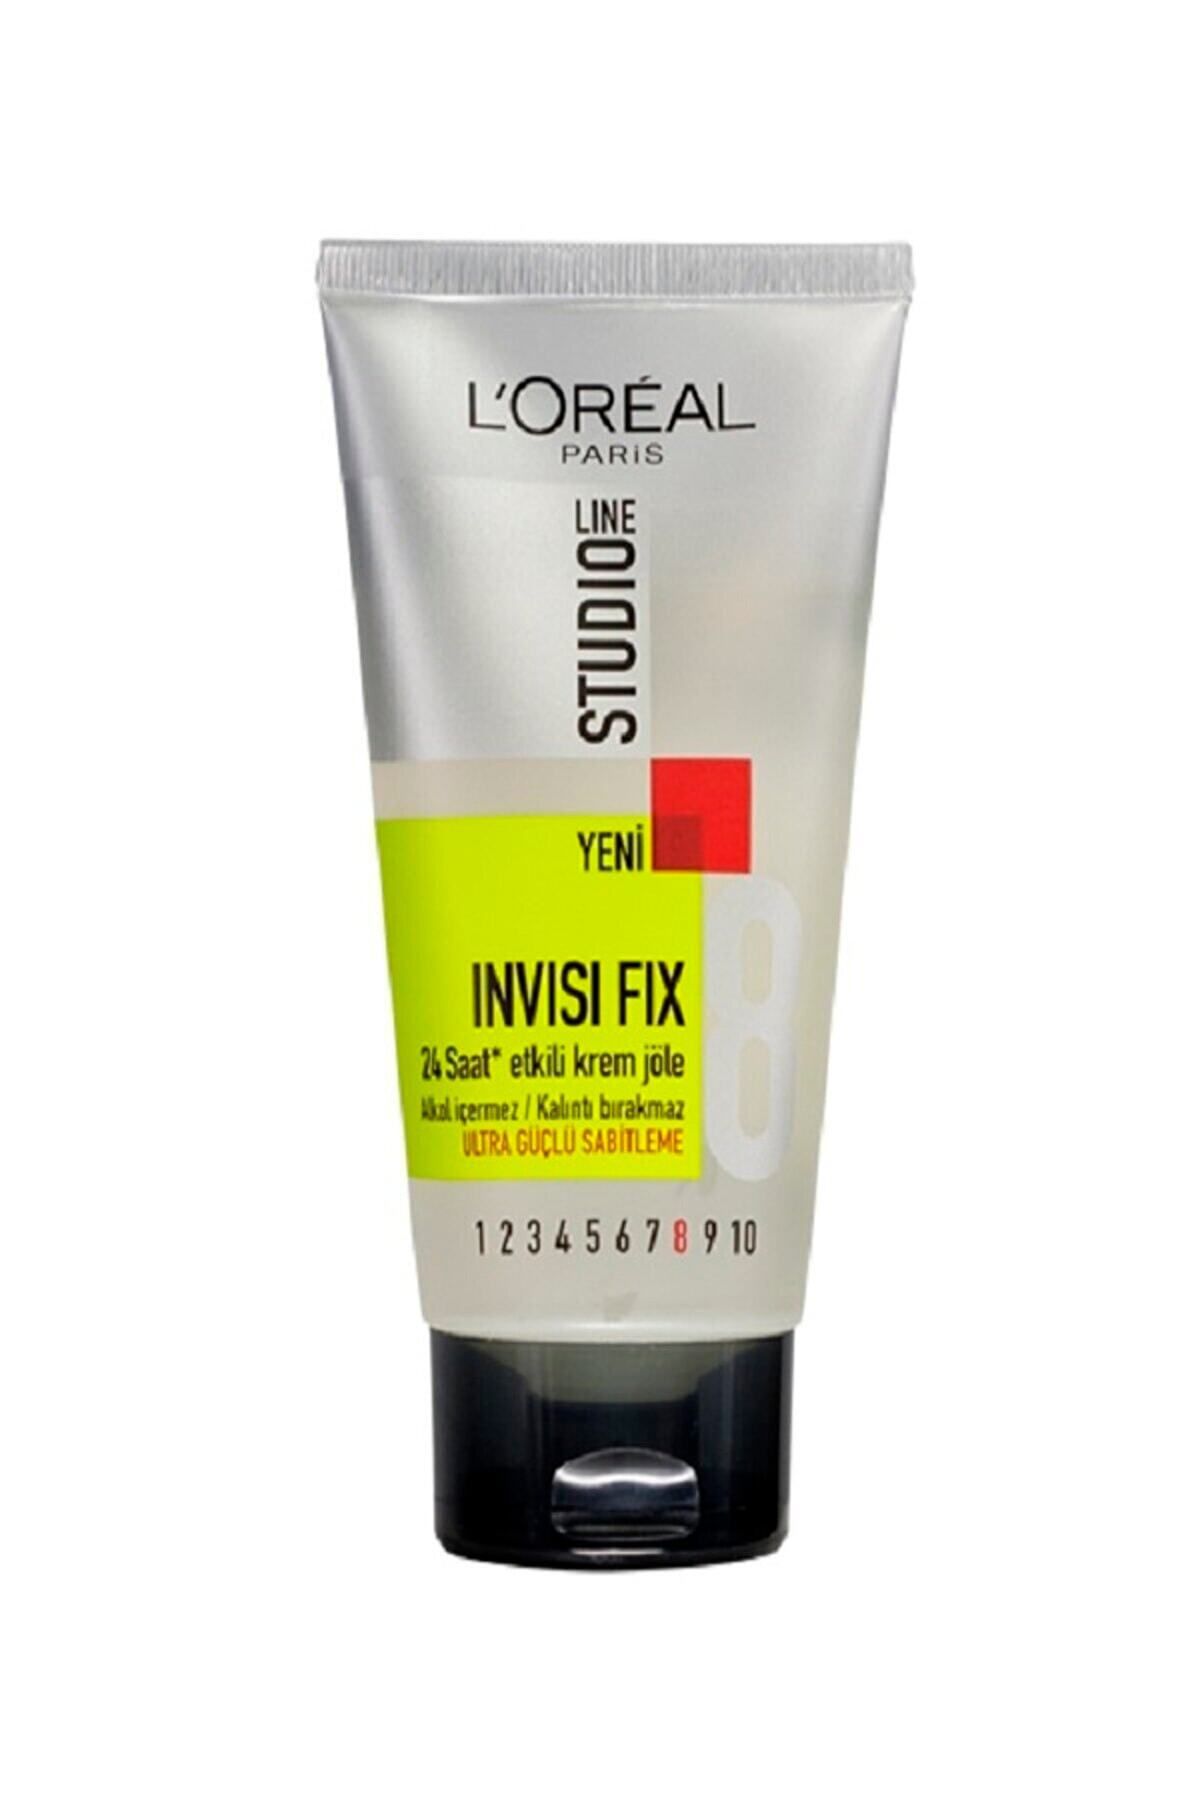 L'Oreal Paris An Ultra Strong Stabilizer in Your Hair Invisi Fix 24h Ultra Strong Hair Gel No:8 150 Ml GKÜRN416